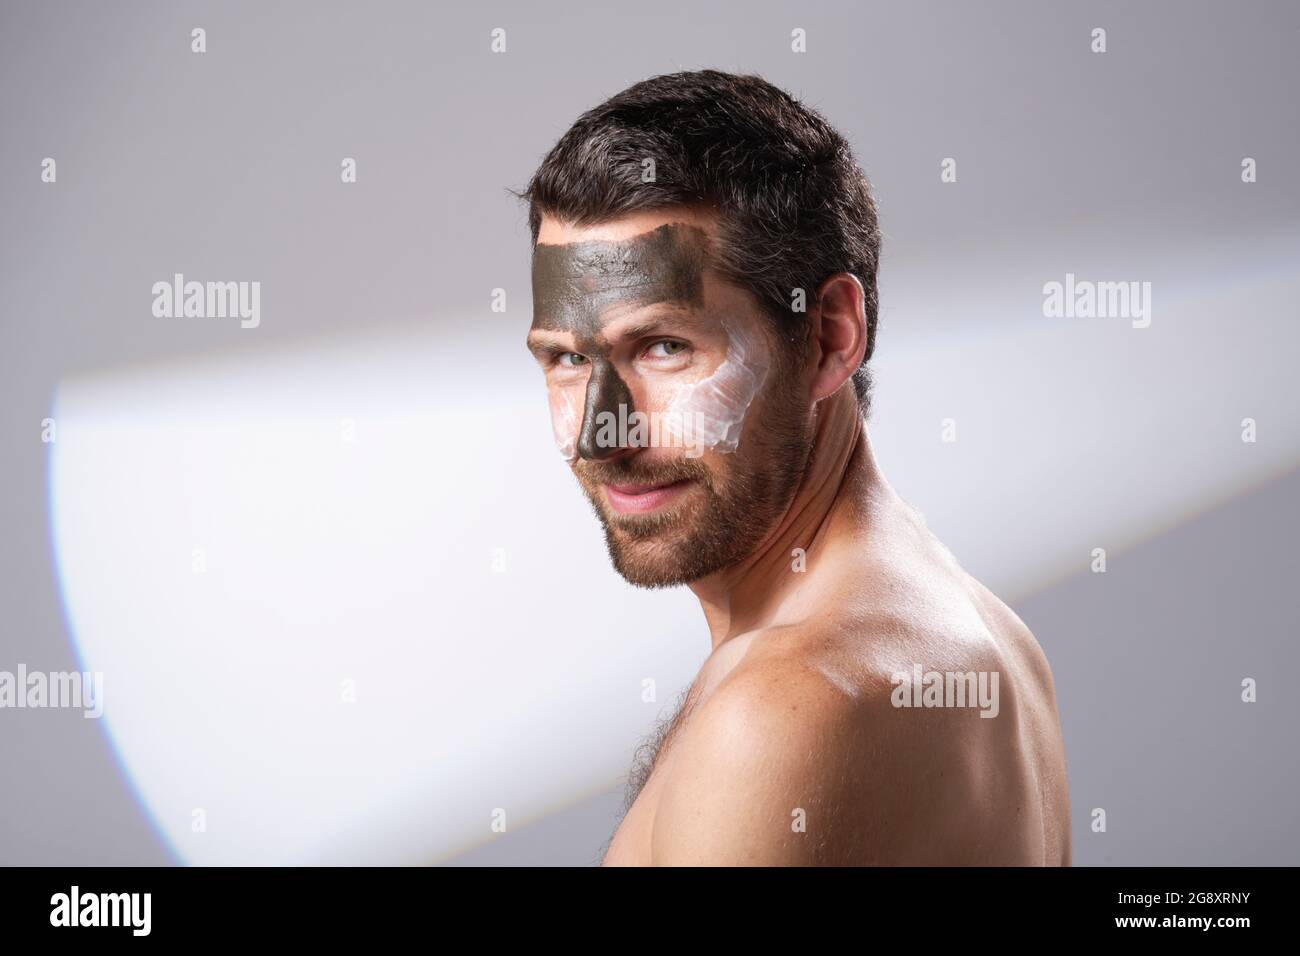 Man using facial products on his skin. Face mask treatments. Rejuvenating, moisture adding masks. Stock Photo